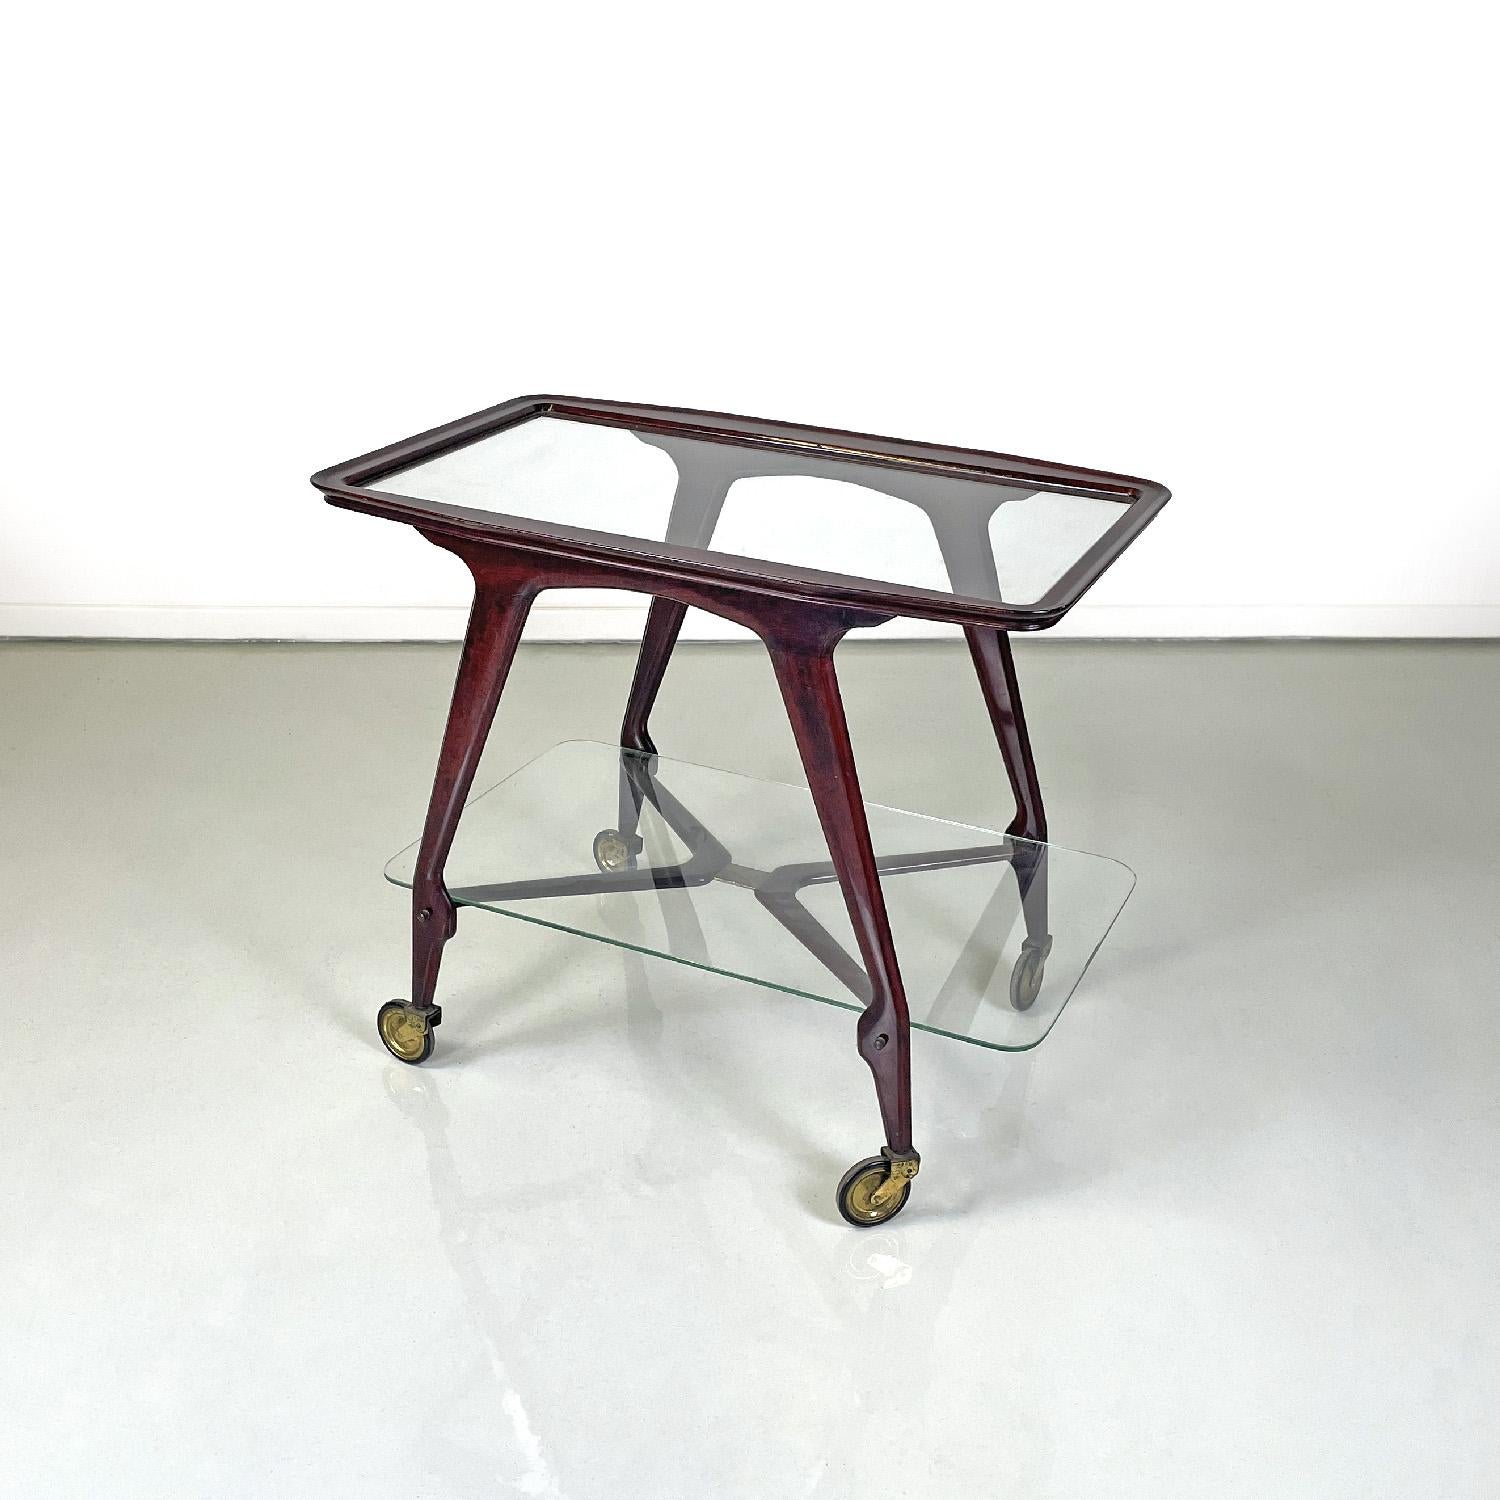 Italian mid-century modern wooden cart two glass tops and brass wheels, 1950s
Cart with two rectangular shelves. The structure of the cart is made of wood, the upper surface is externally made of wood while the internal part is made of glass. The